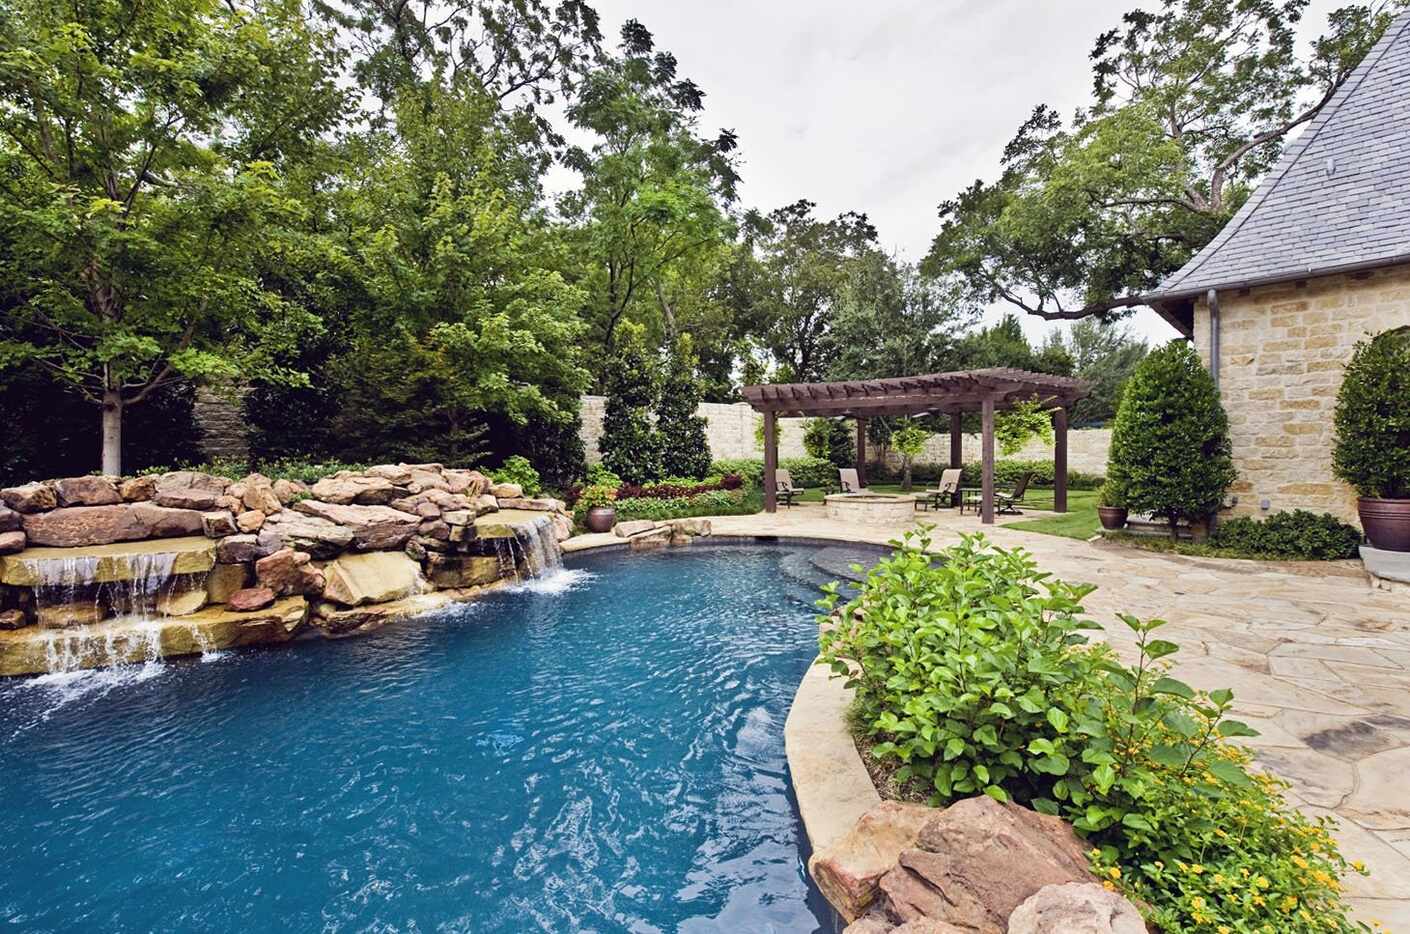 Check out the rock waterfalls on this pool.